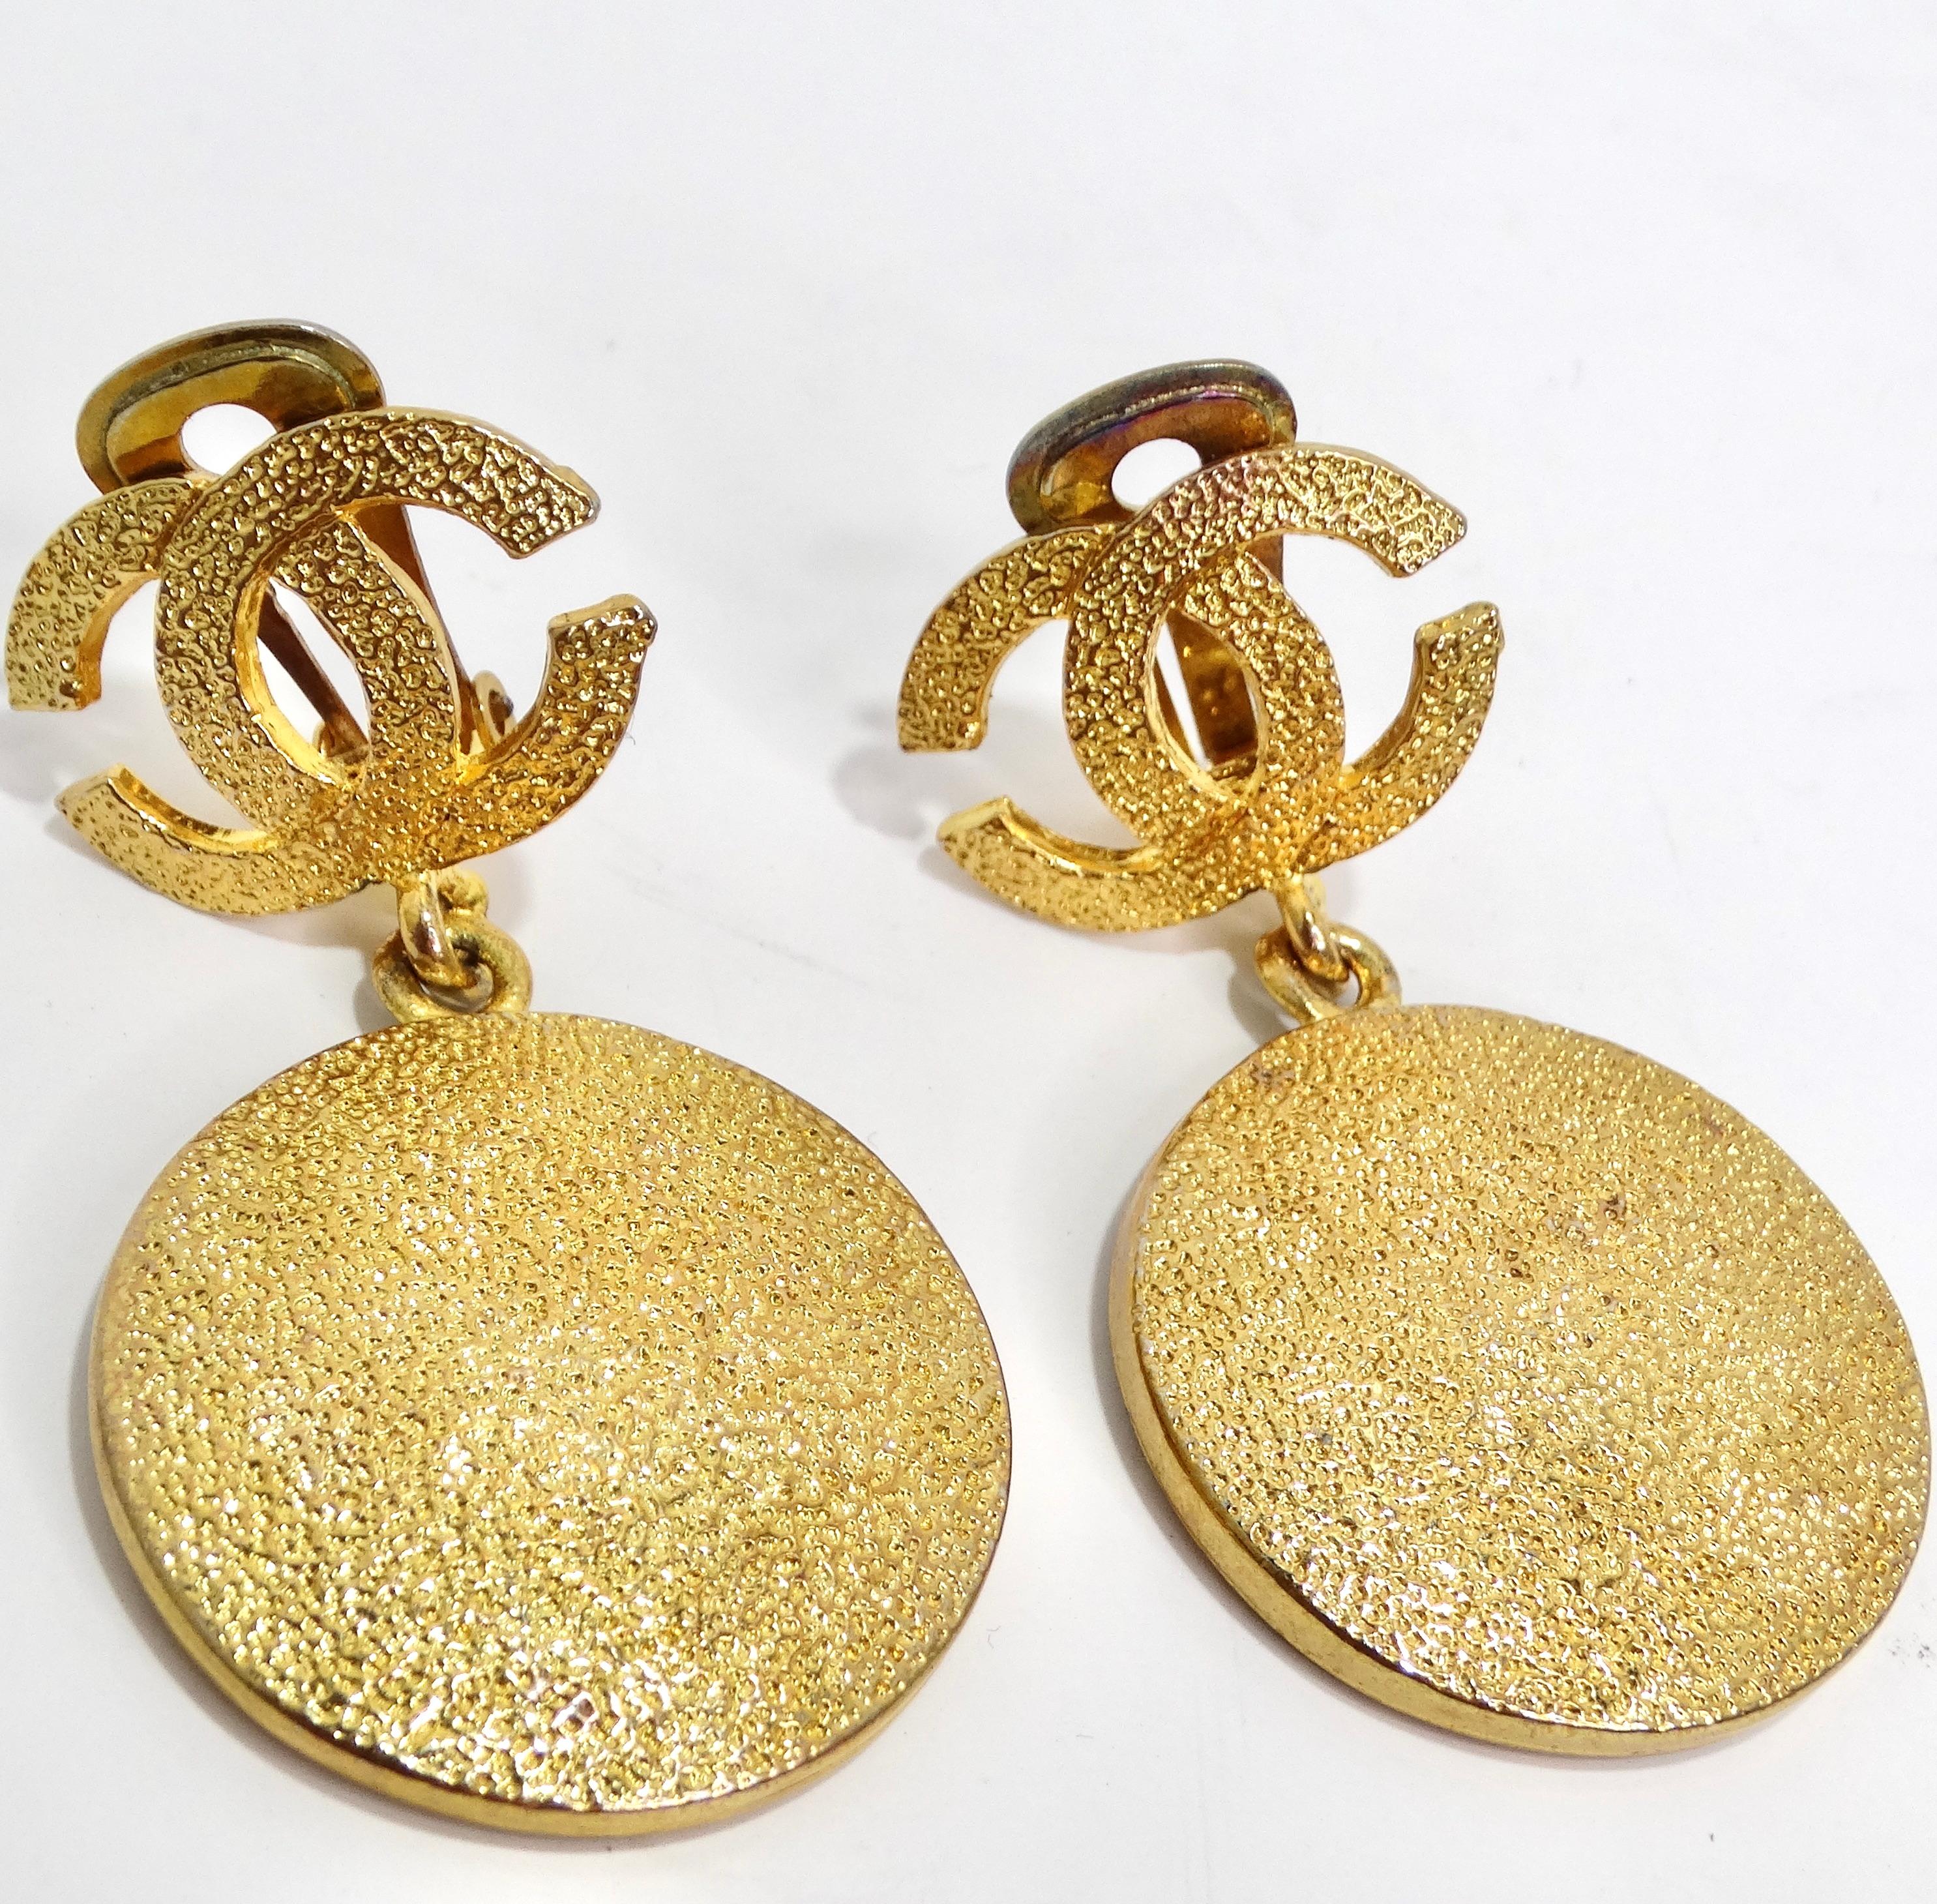 Introducing the vintage Chanel 1980s Textured Gold Tone Clip-On Earrings – a true classic from the era of glamour and extravagance. These iconic earrings are the epitome of 1980s style, and they're the perfect way to add a touch of timeless luxury